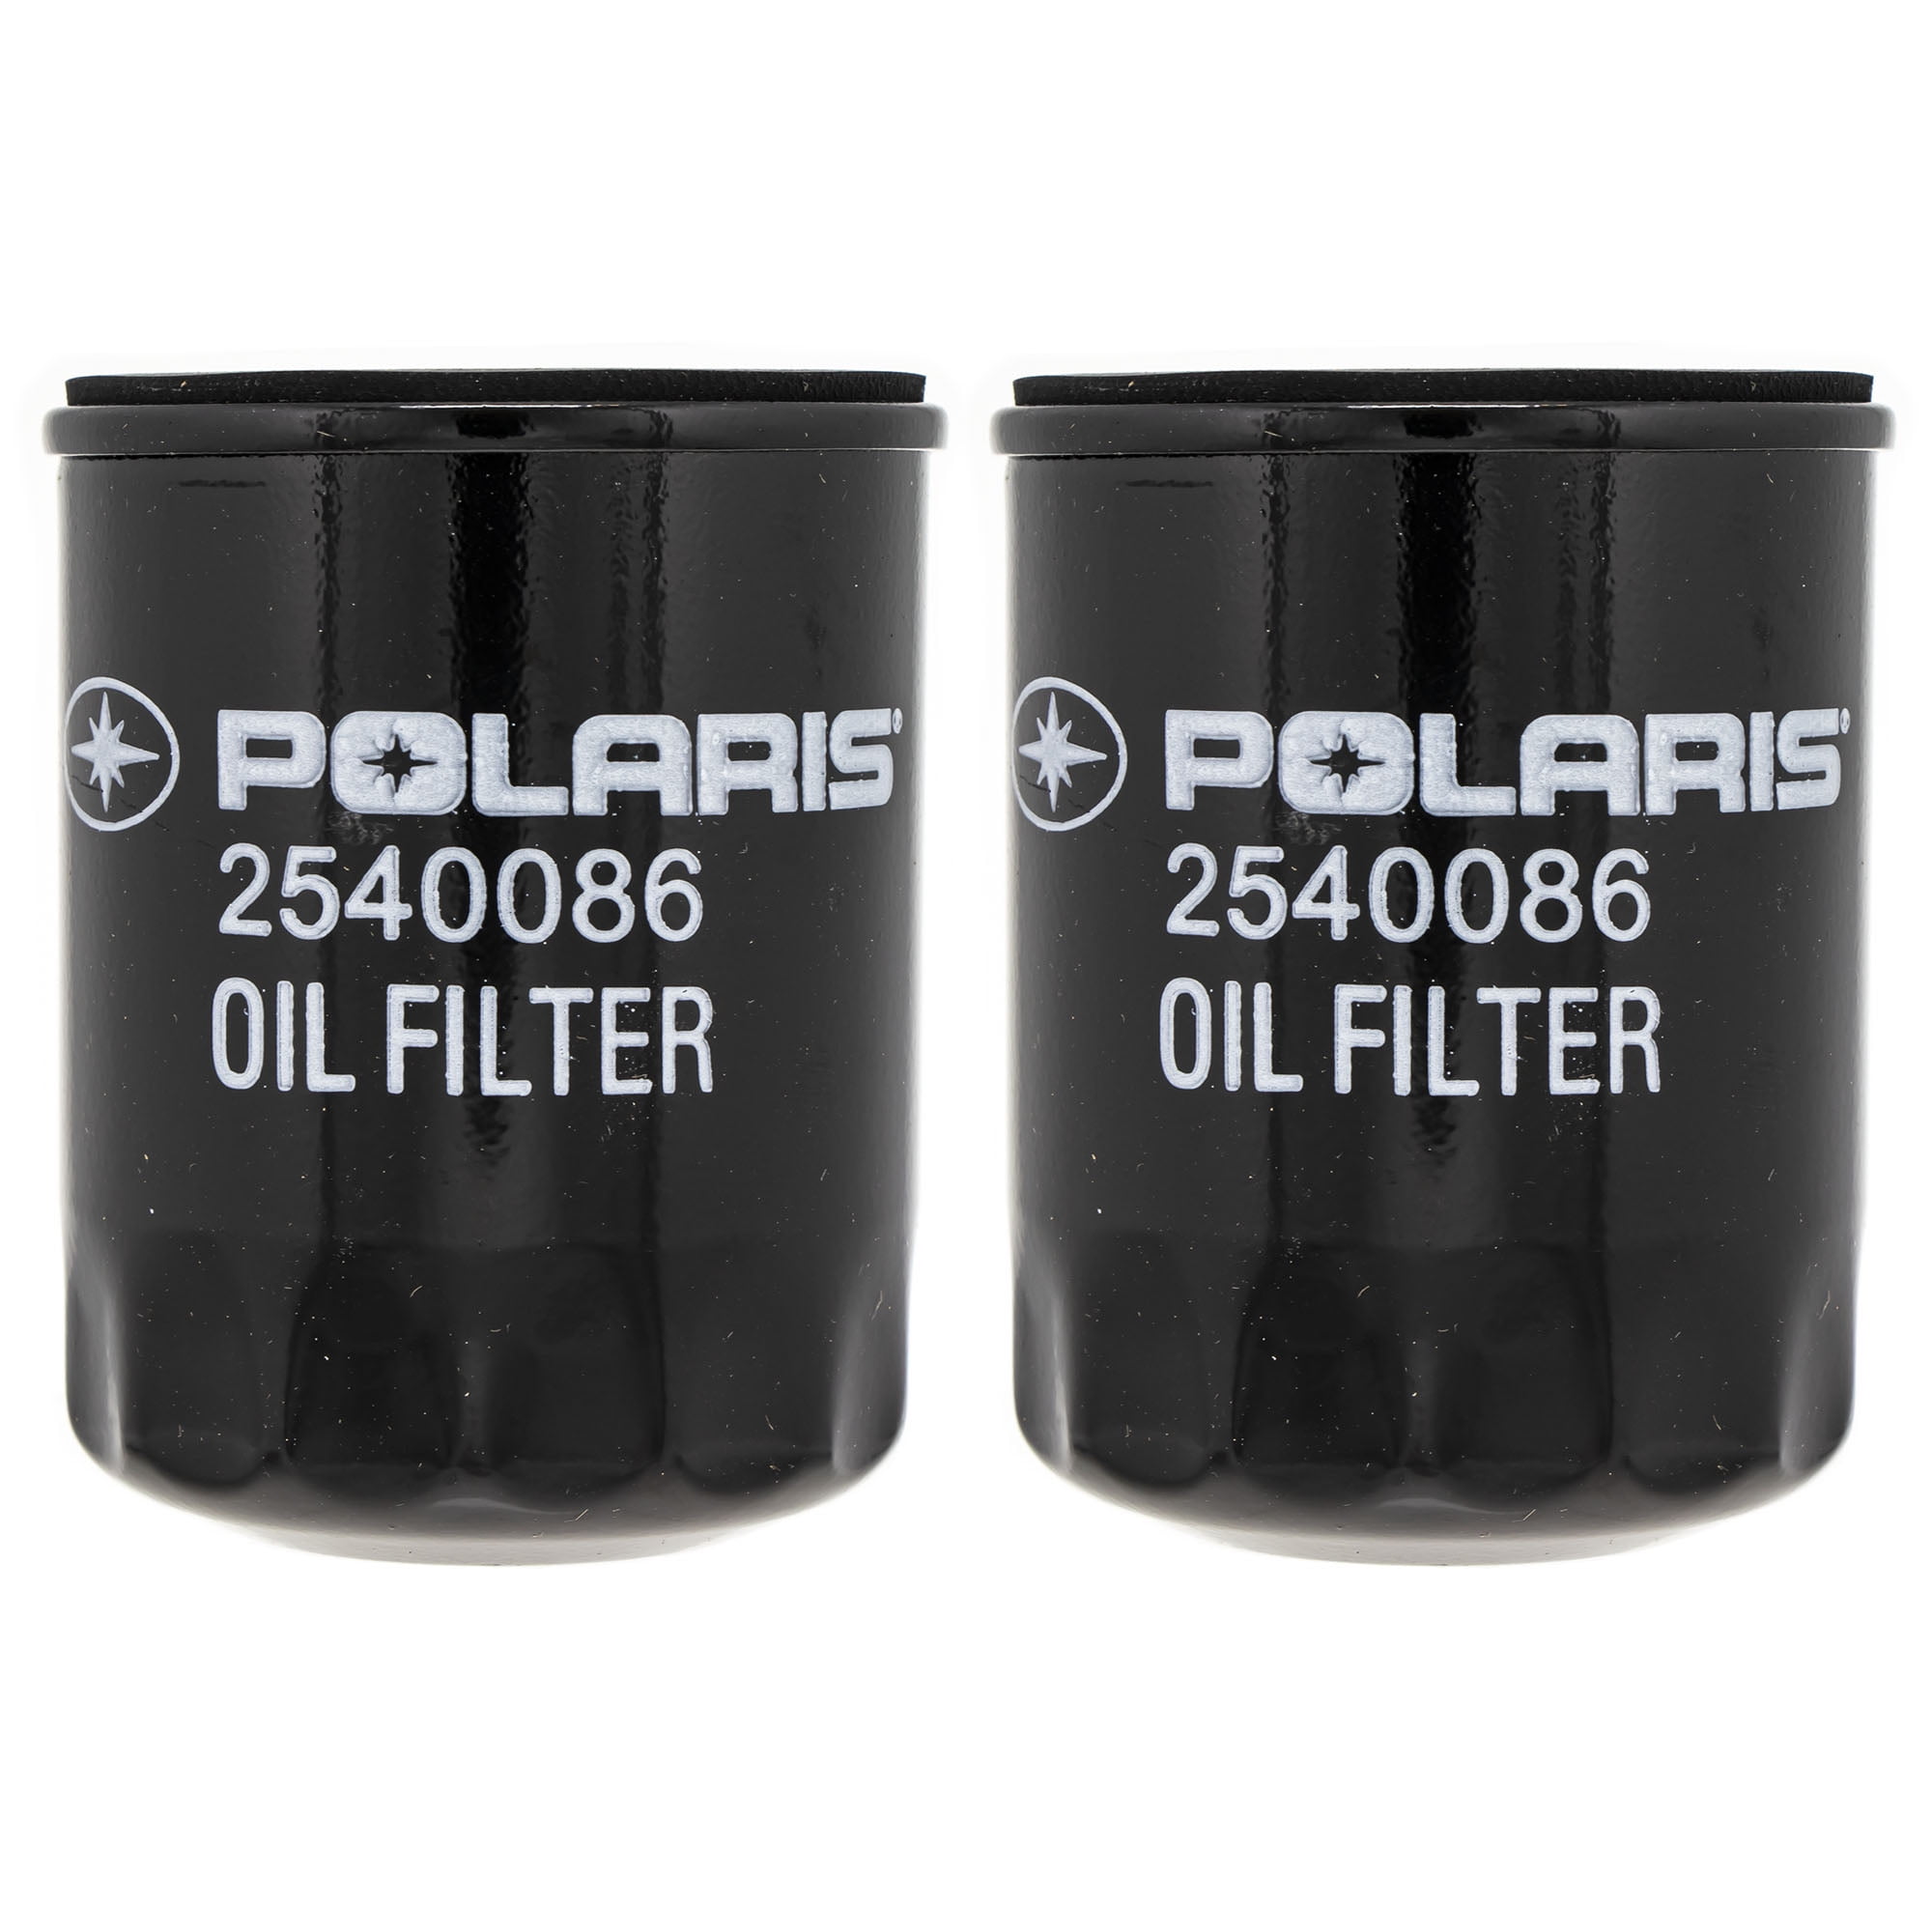 Dxent 2Pack 2540086 2540122 Oil Filter Compatible with Polaris Ranger 700 800 900 XP RZR S Replace for HF198 198 